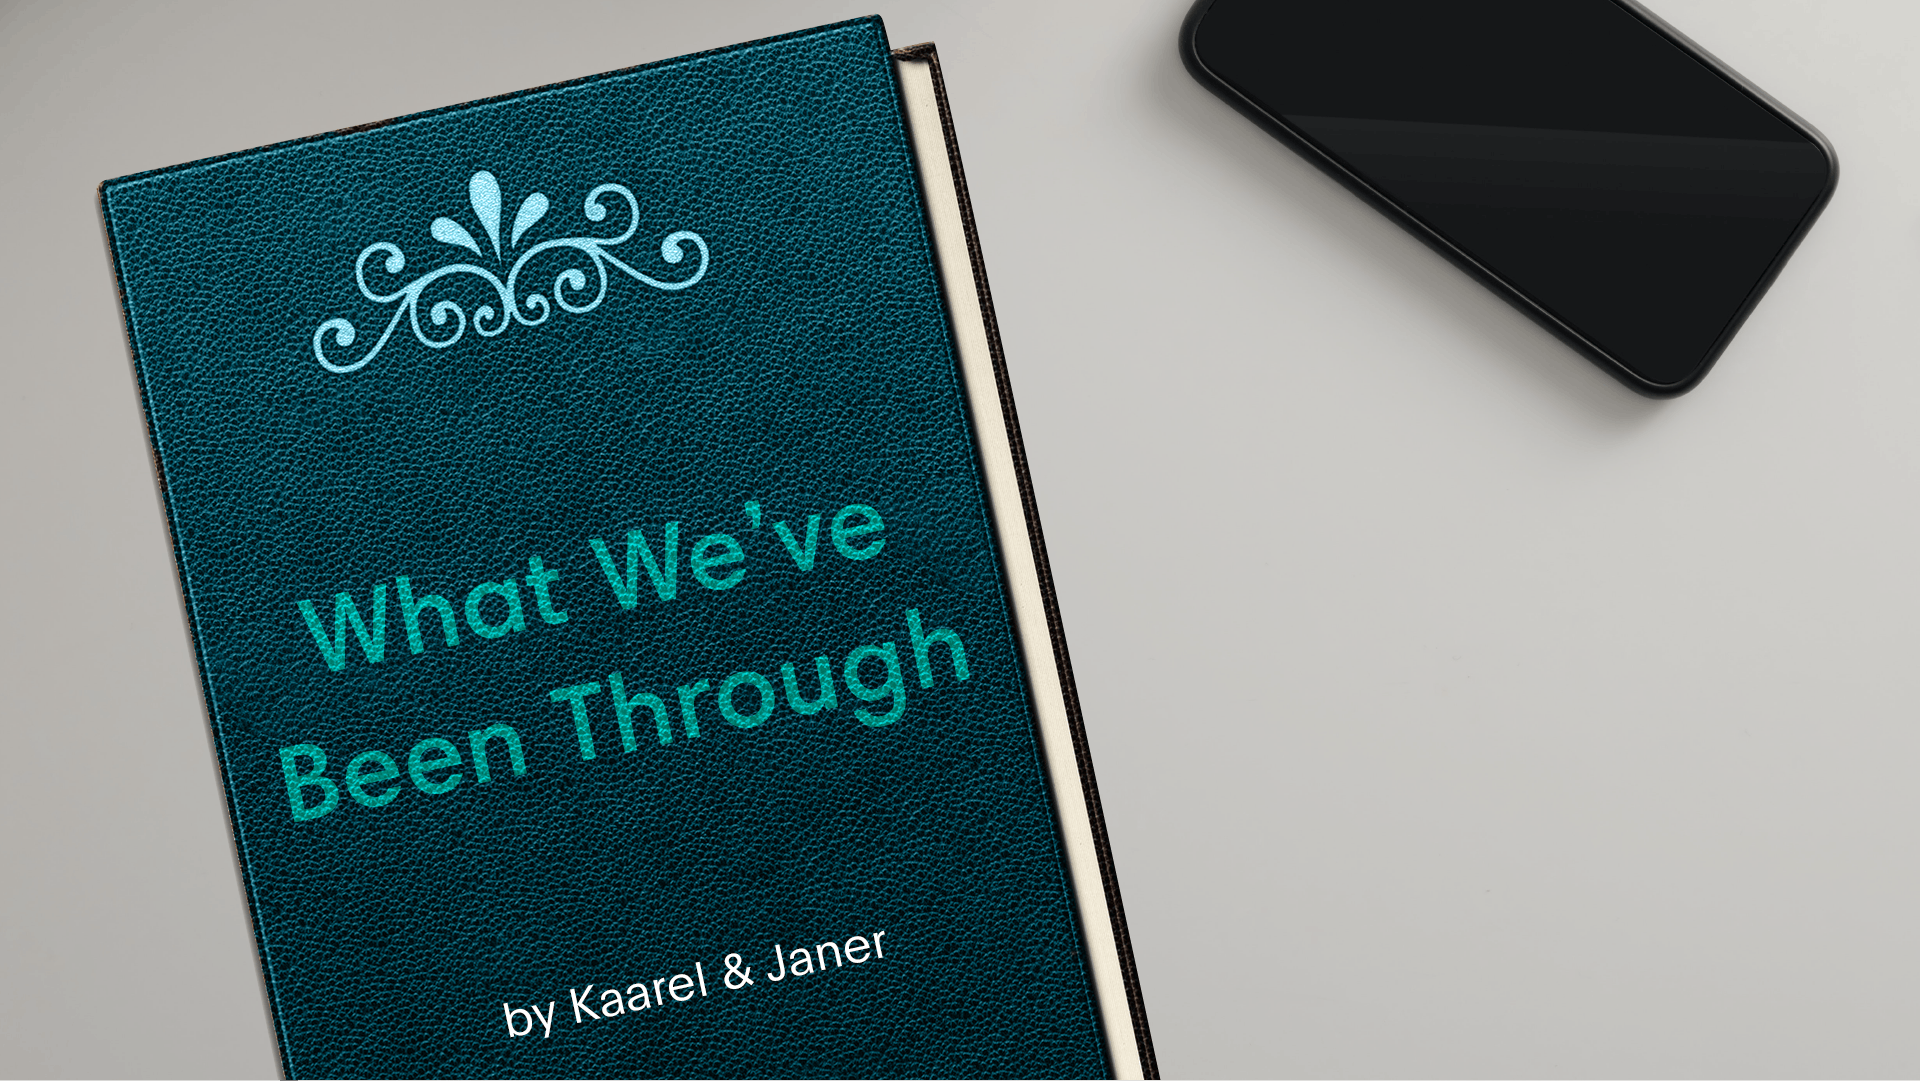 A book titled "What we've been through" by Kaarel & Janer